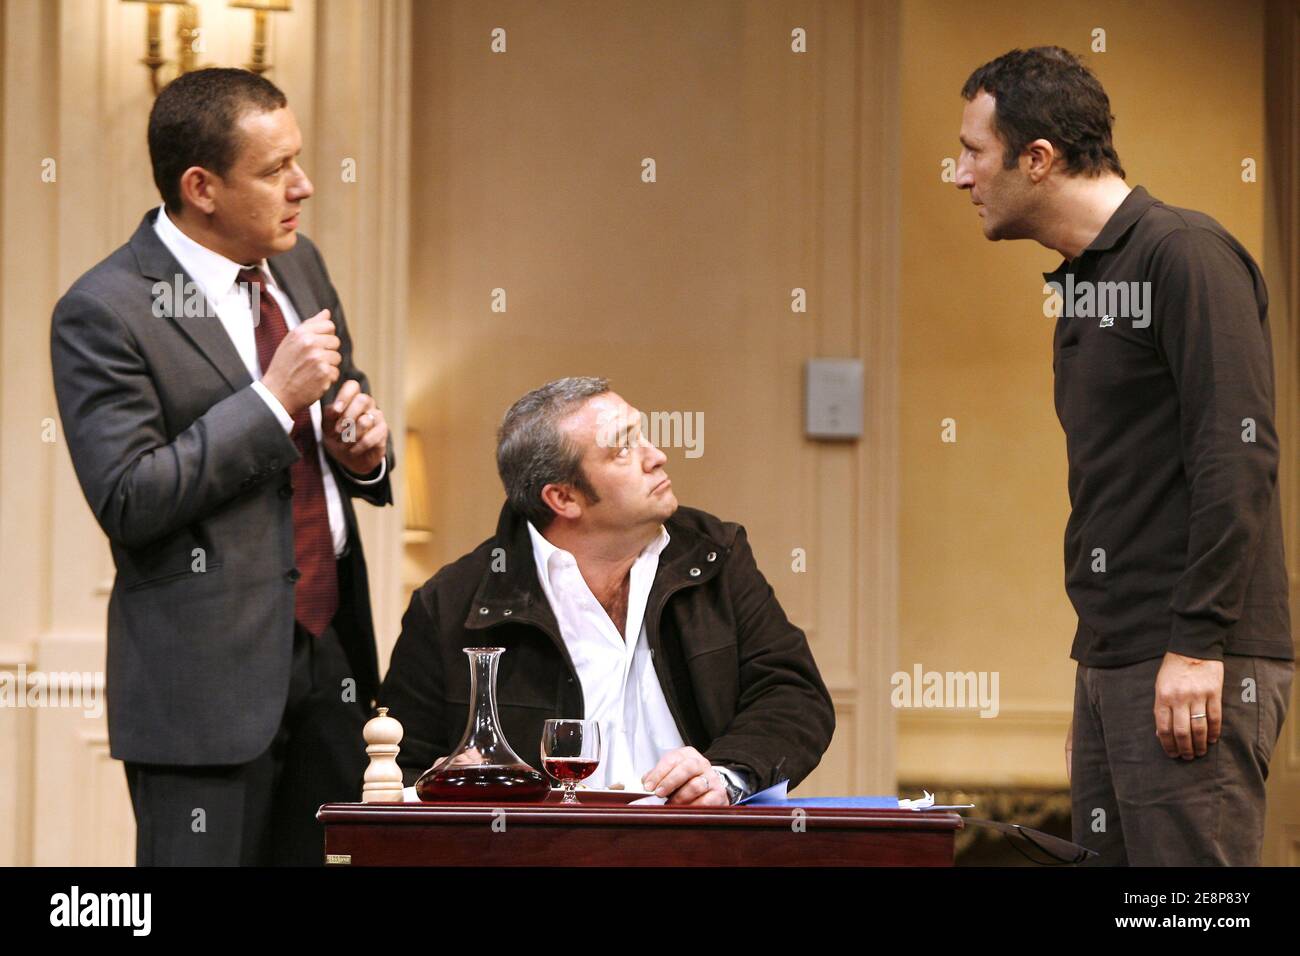 French actors Dany Boon, Laurent Gamelon and Arthur during the run-through of the play 'Le Diner de Cons', staged by Francis Veber at the Theatre de la Porte Saint-Martin in Paris, France on September 19, 2007. Also starring in the play: Stephane Bierry, Jessica Borio, Olivier Granier and Juliette Meyniac. Photo by Thierry Orban/ABACAPRESS.COM Stock Photo